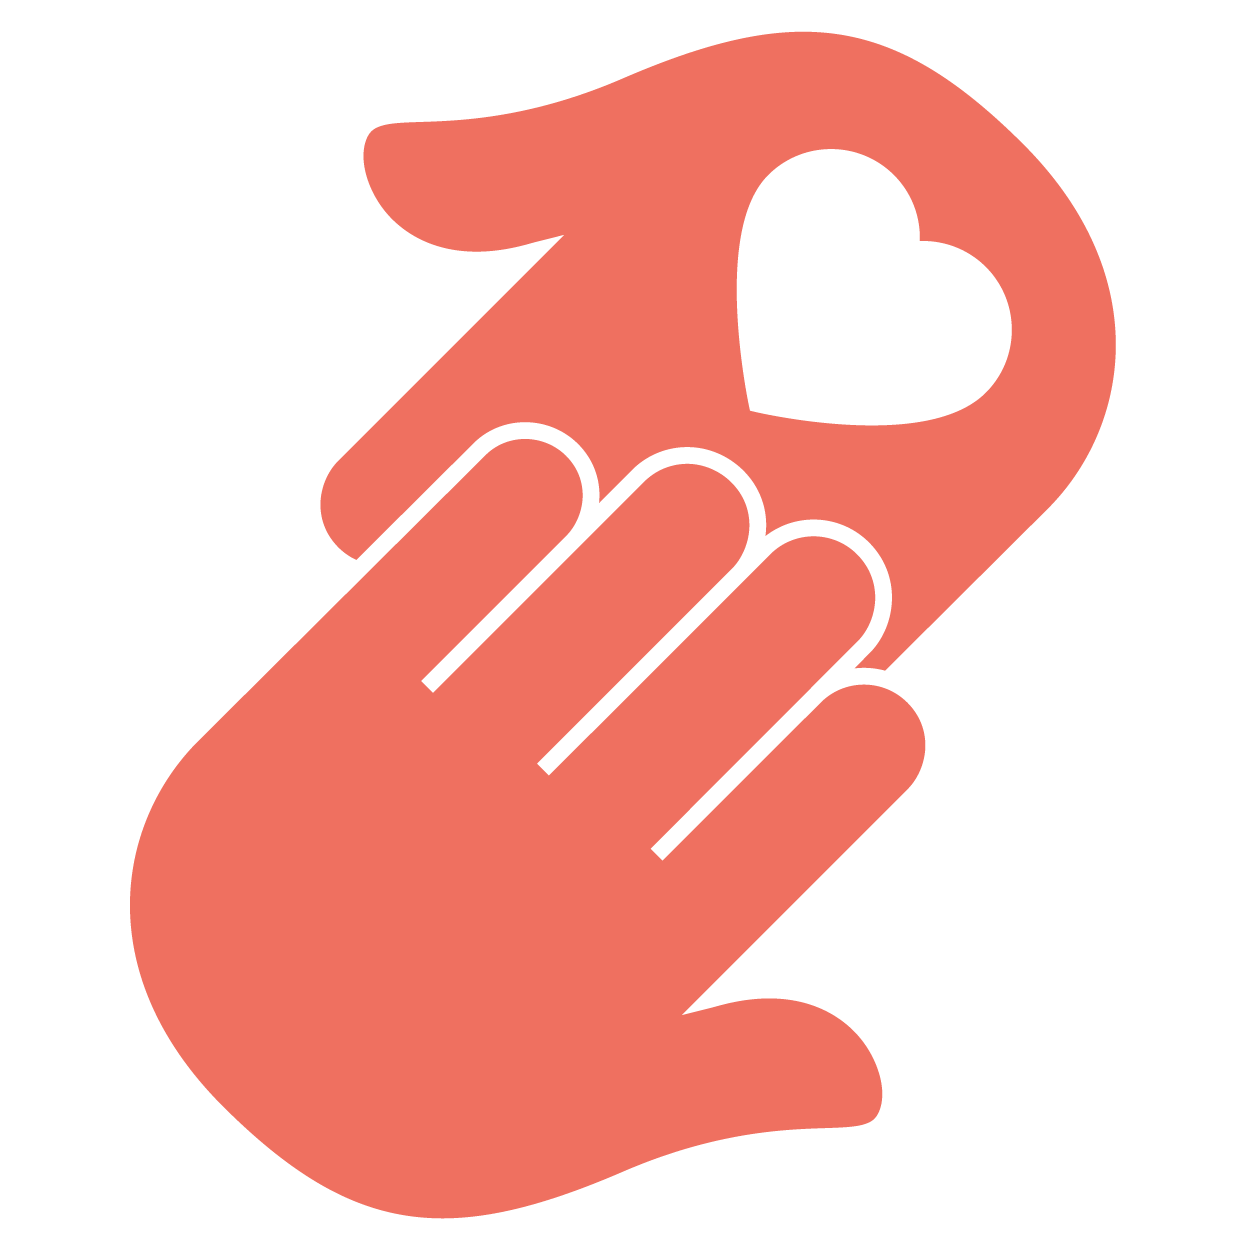 Therapy and helping hands icon